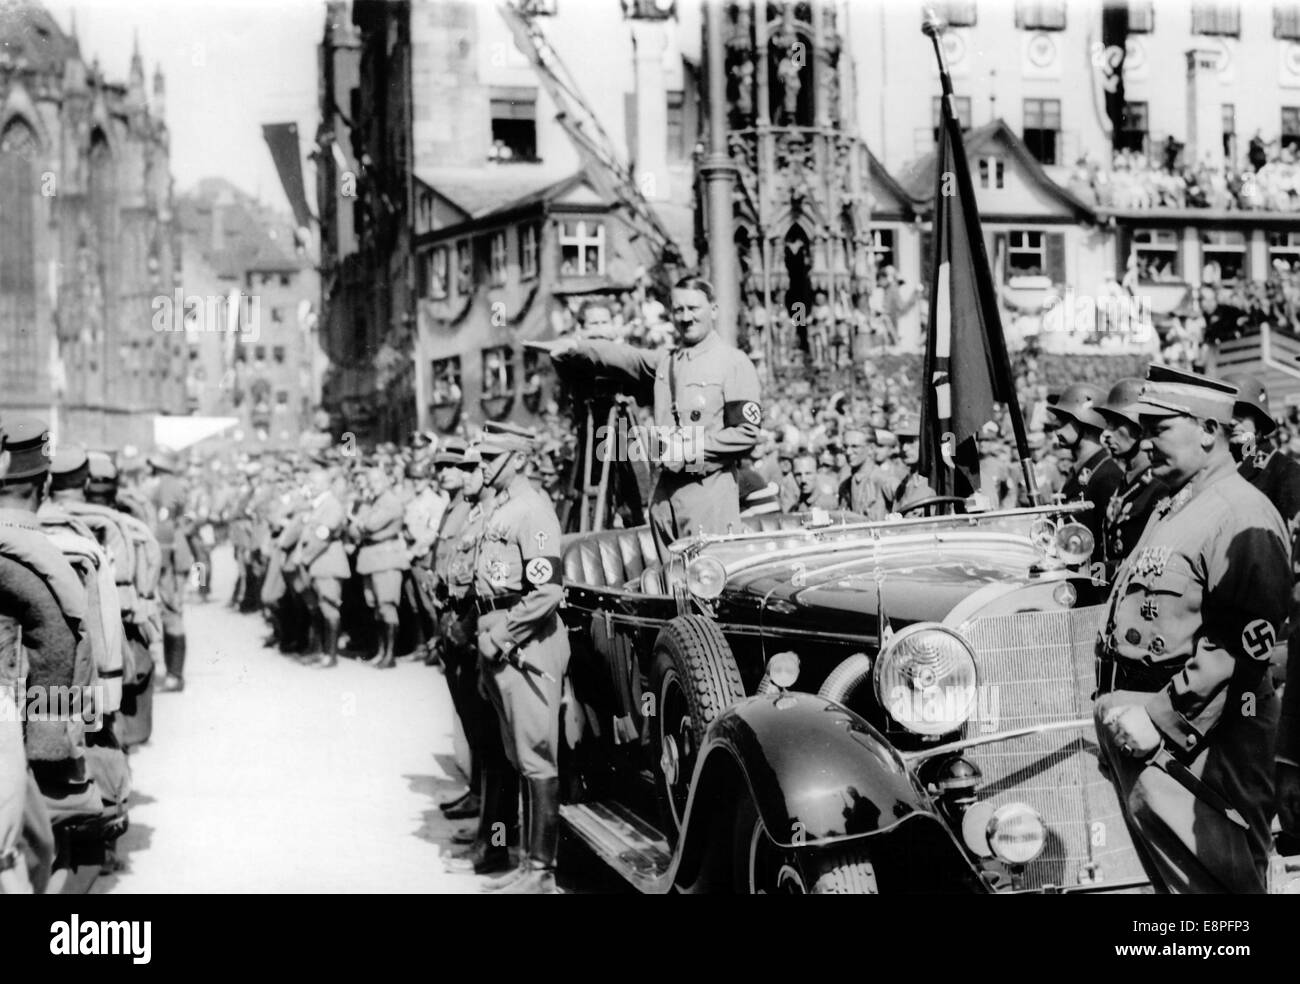 Nuremberg Rally 1934 in Nuremberg, Germany - Adolf Hitler greets an SA (Sturmabteilung) parade with the Nazi salute. On the right: Hermann Goering. (Flaws in quality due to the historic picture copy) Fotoarchiv für Zeitgeschichtee - NO WIRE SERVICE - Stock Photo